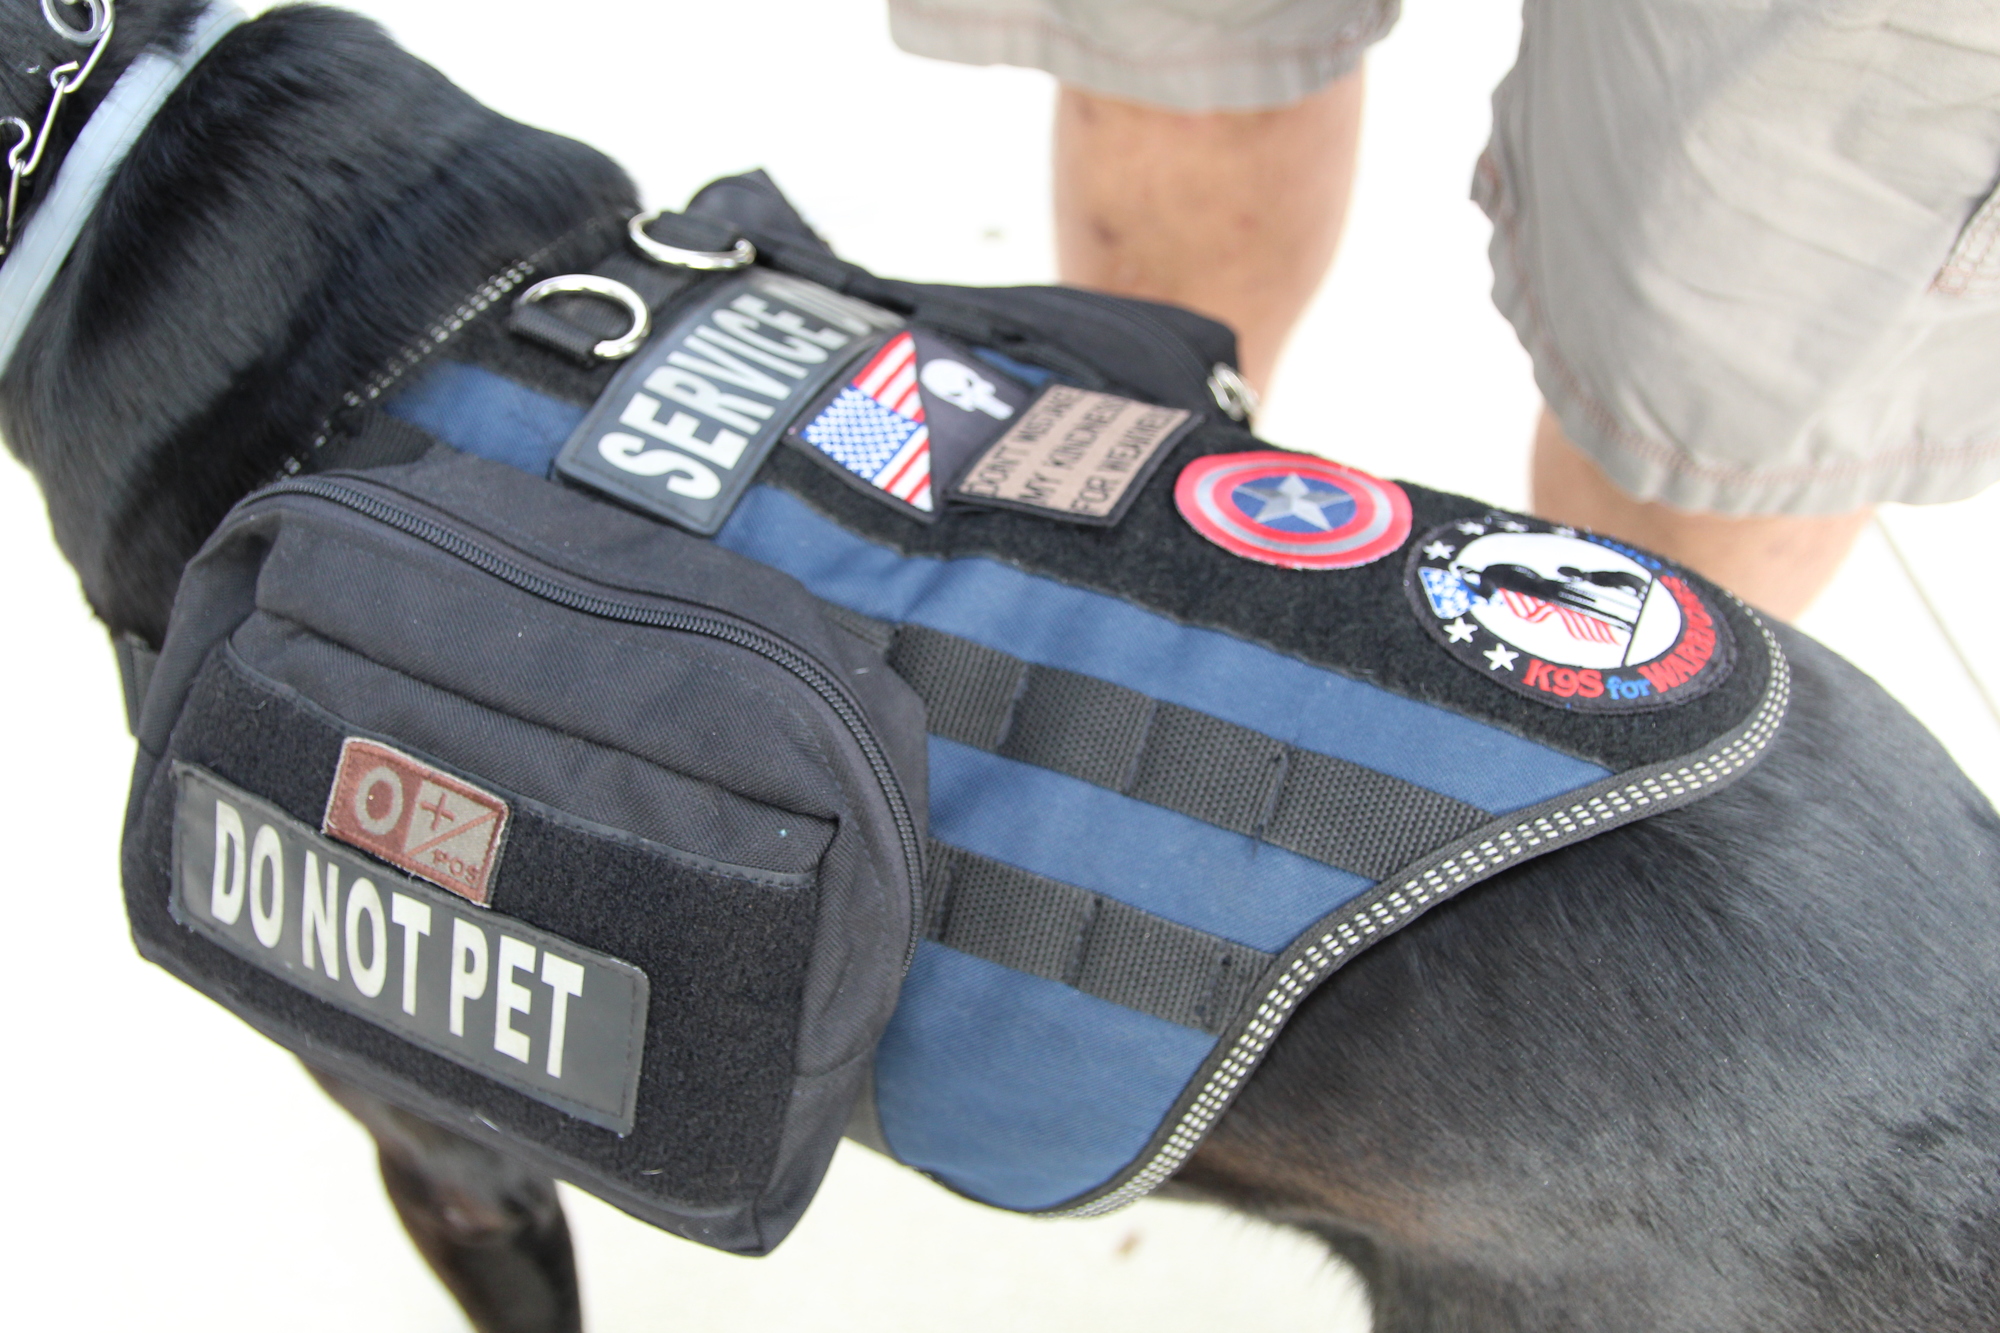 Slider, a 4-year-old black lab, wears a vest when he working, but Portell has embellished it with his own patches.